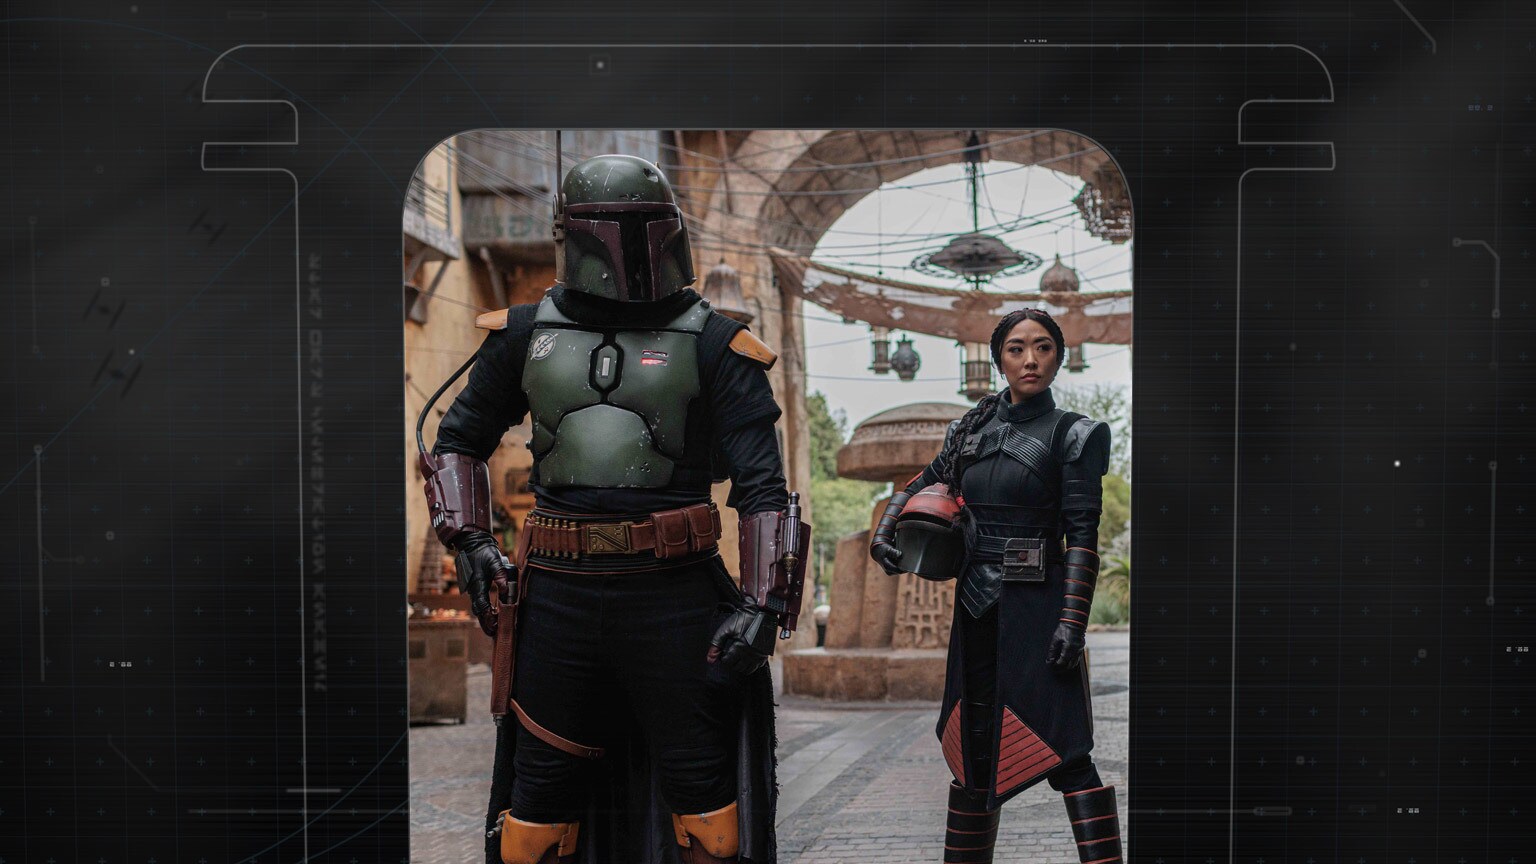 SWCA 2022: Boba Fett, Fennec Shand, and More Star Wars Characters Coming to Star Wars: Galaxy’s Edge at Disneyland Park